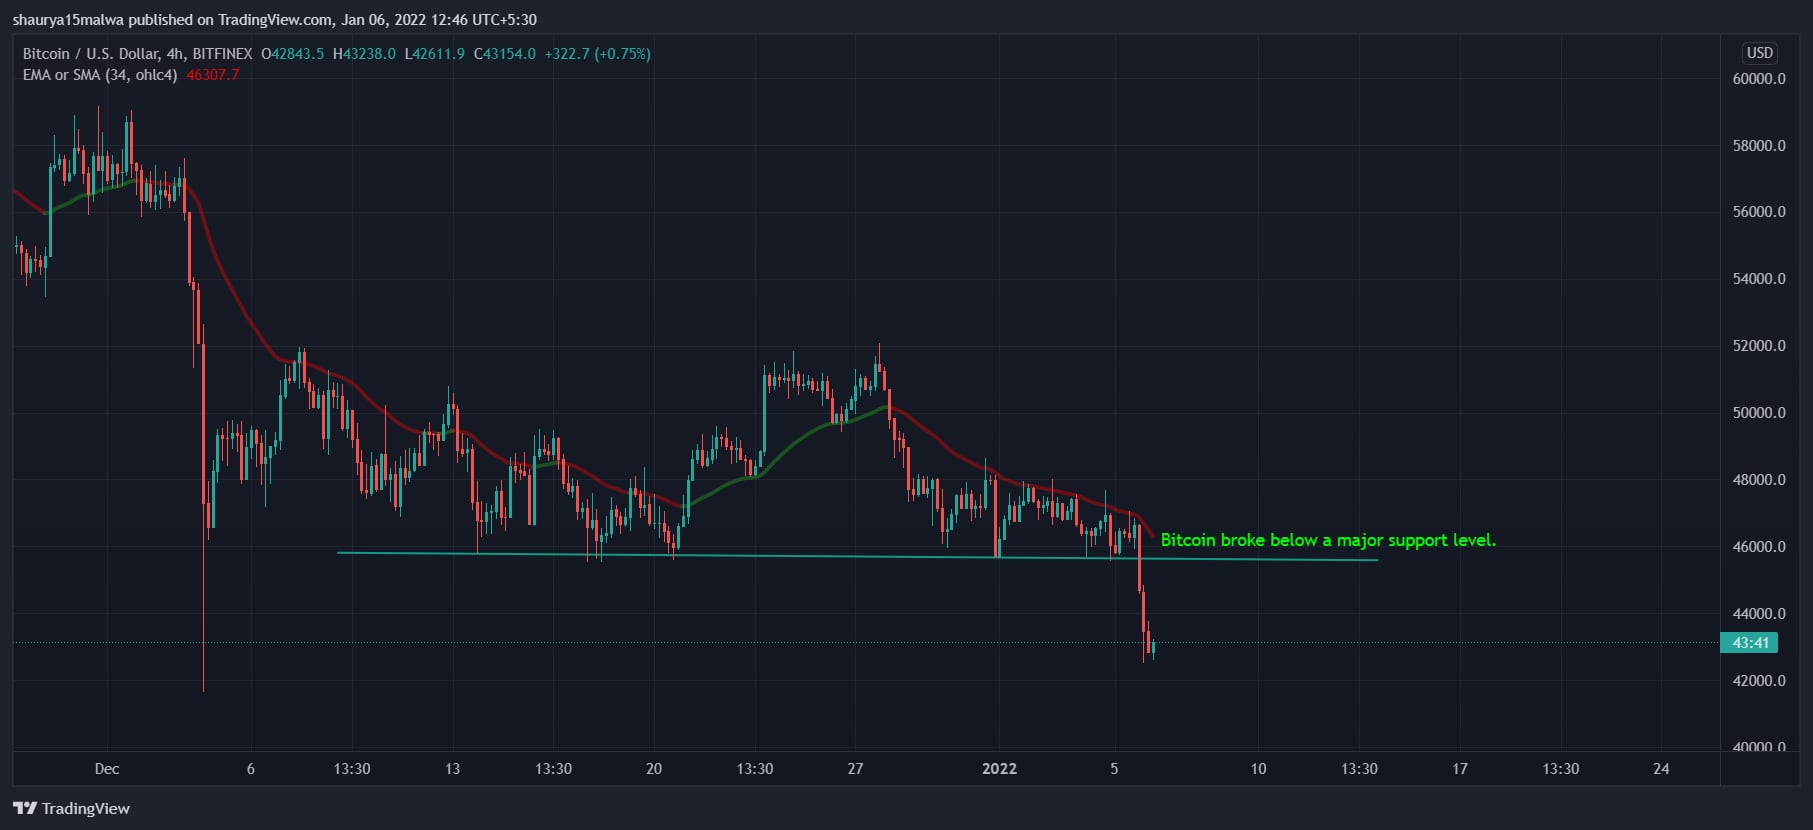 Bitcoin broke below the $46,500 support level on Wednesday. (TradingView)